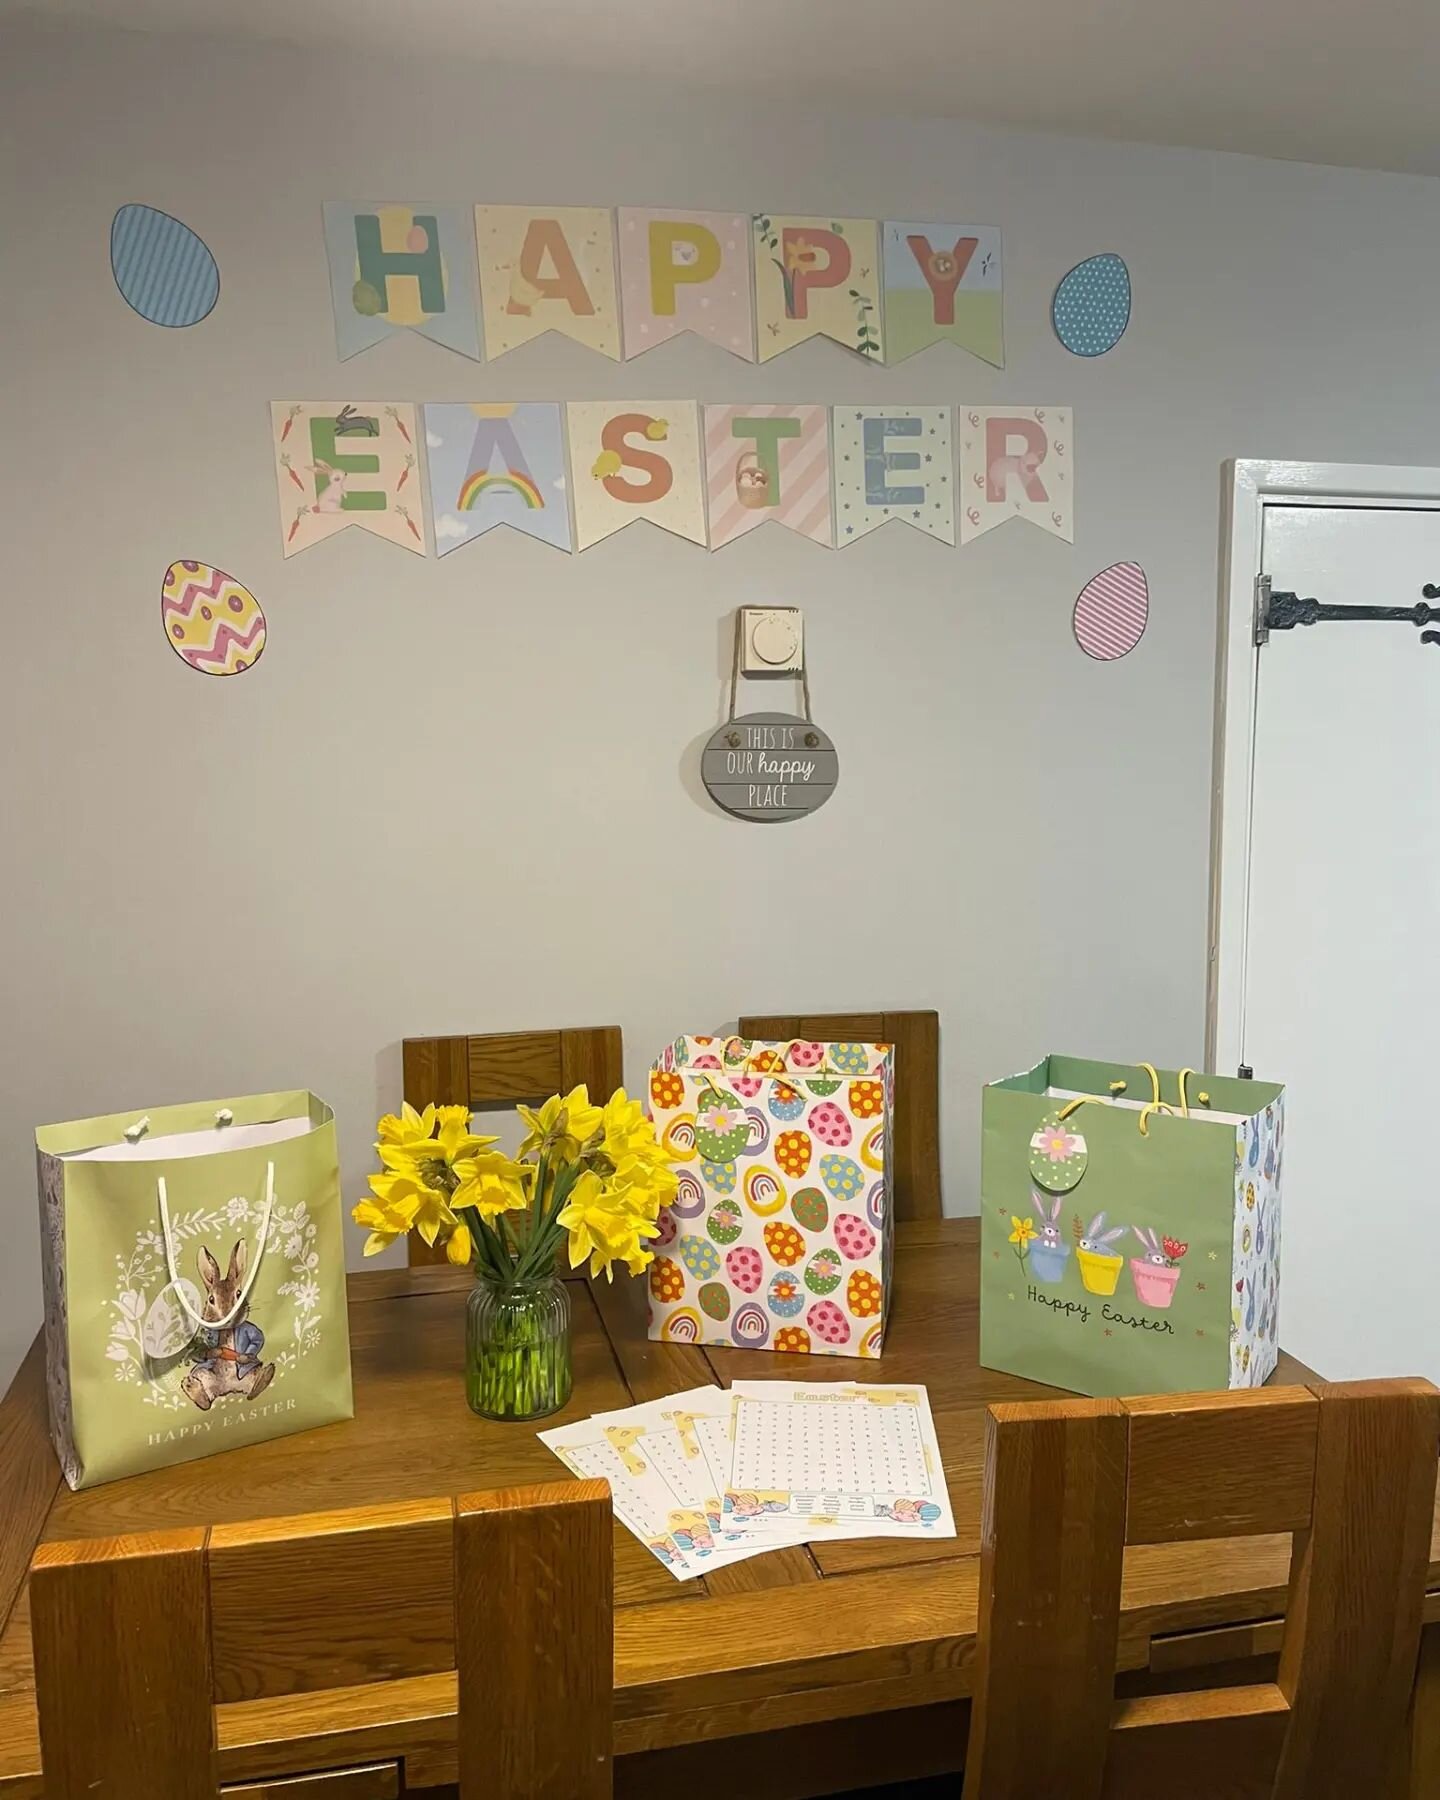 Happy Easter from us all at Amegreen 🐣 💚

We hope you will have a lovely day. Our children at Five Oaken are waking up to an amazing Easter surprise! 💚